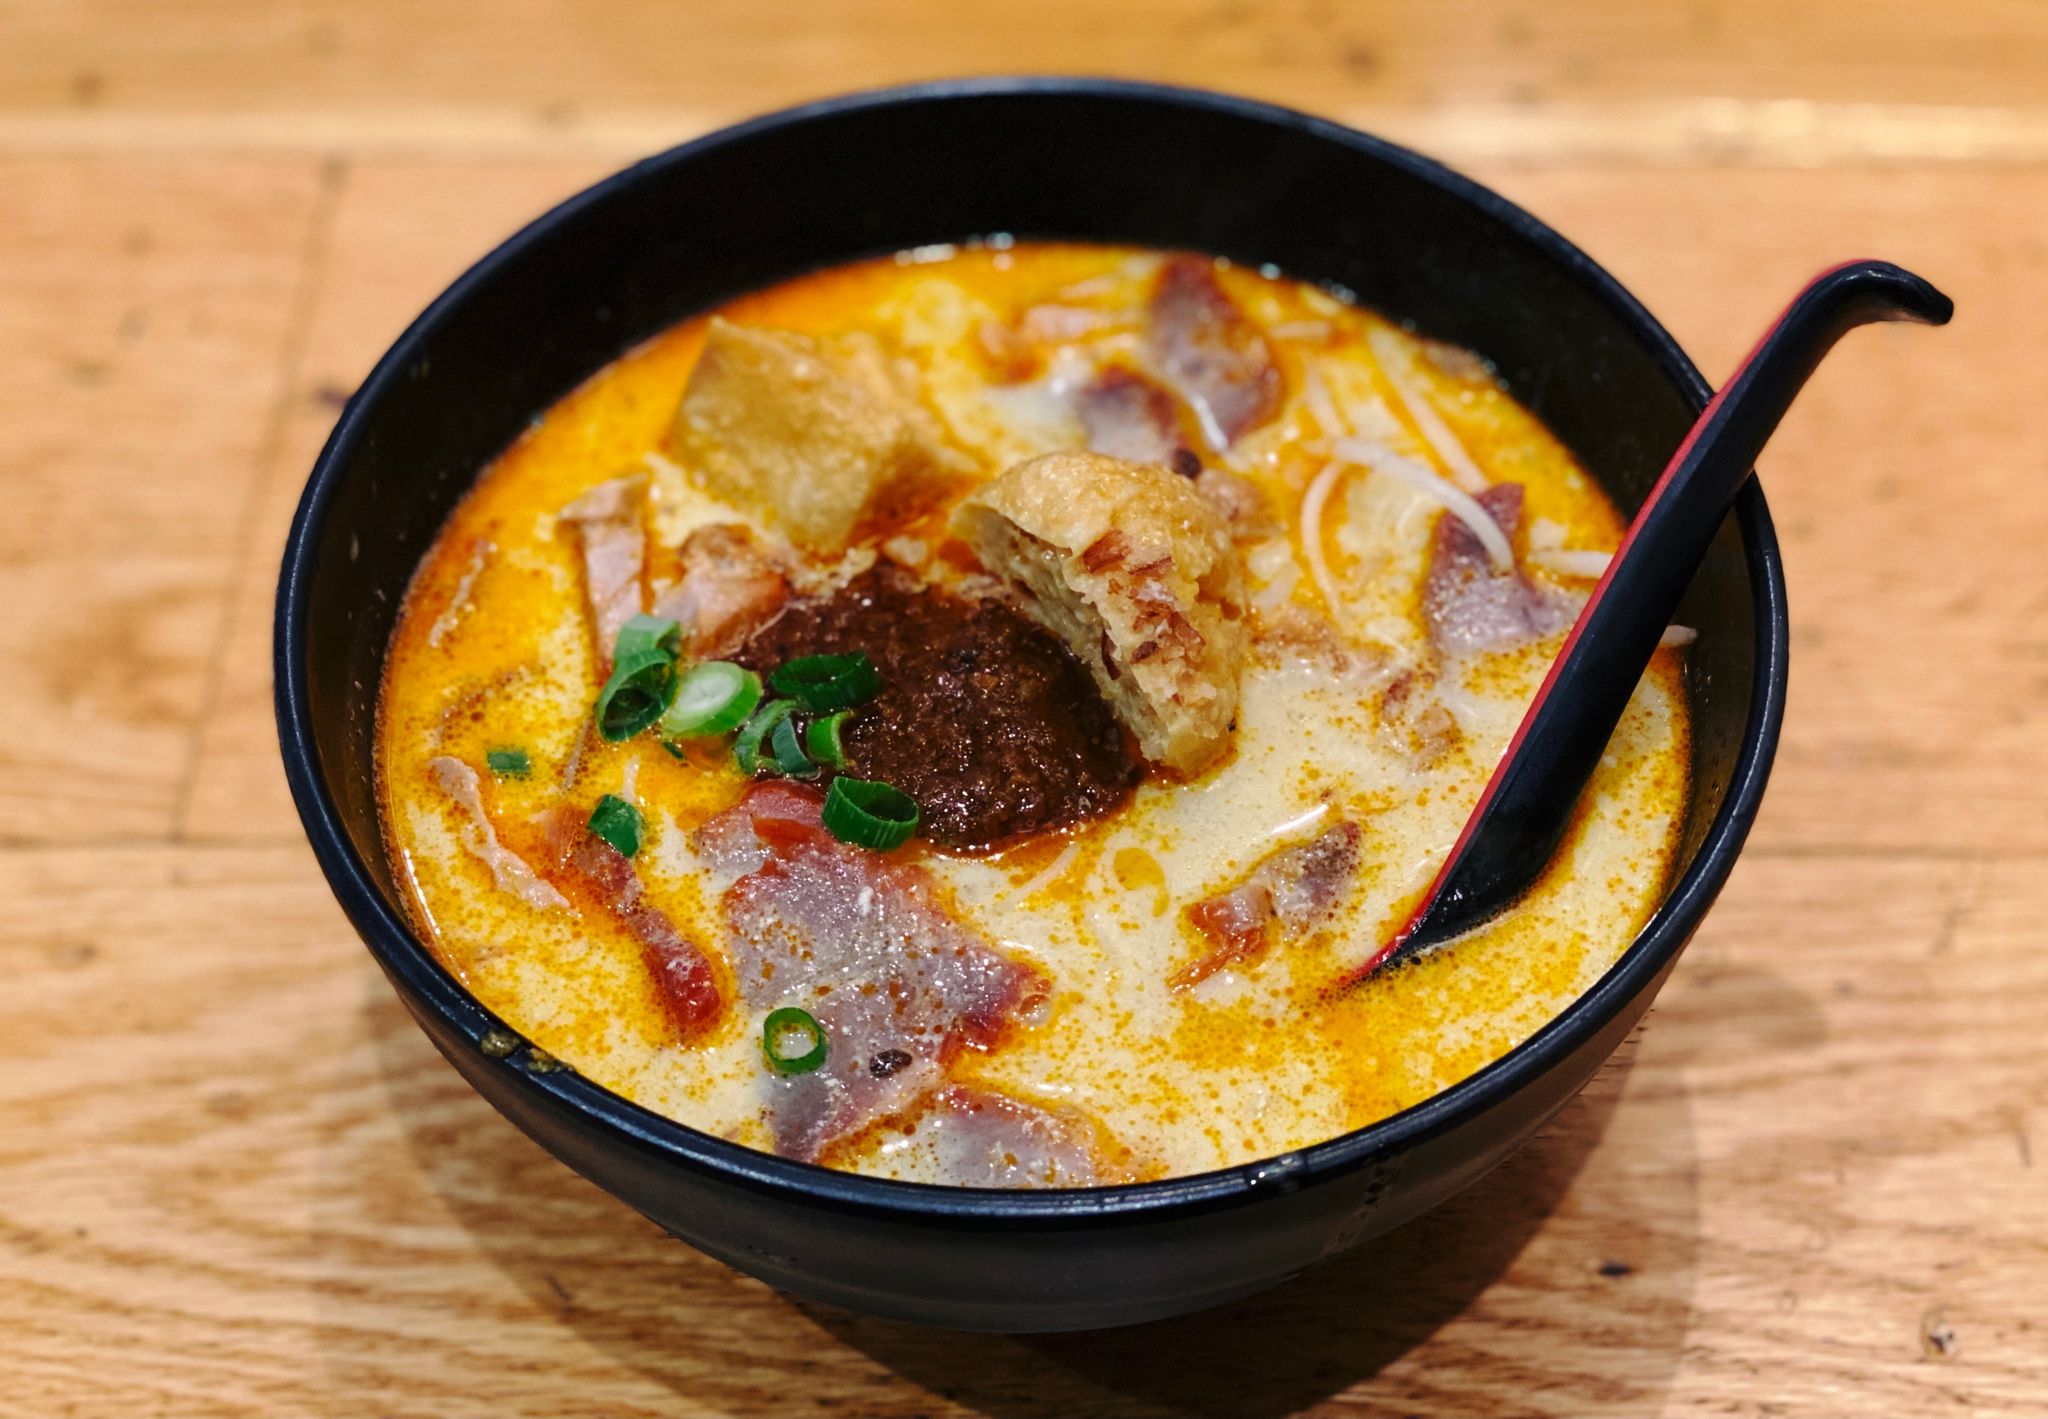 A photo of a bowl of barbecue pork laksa.